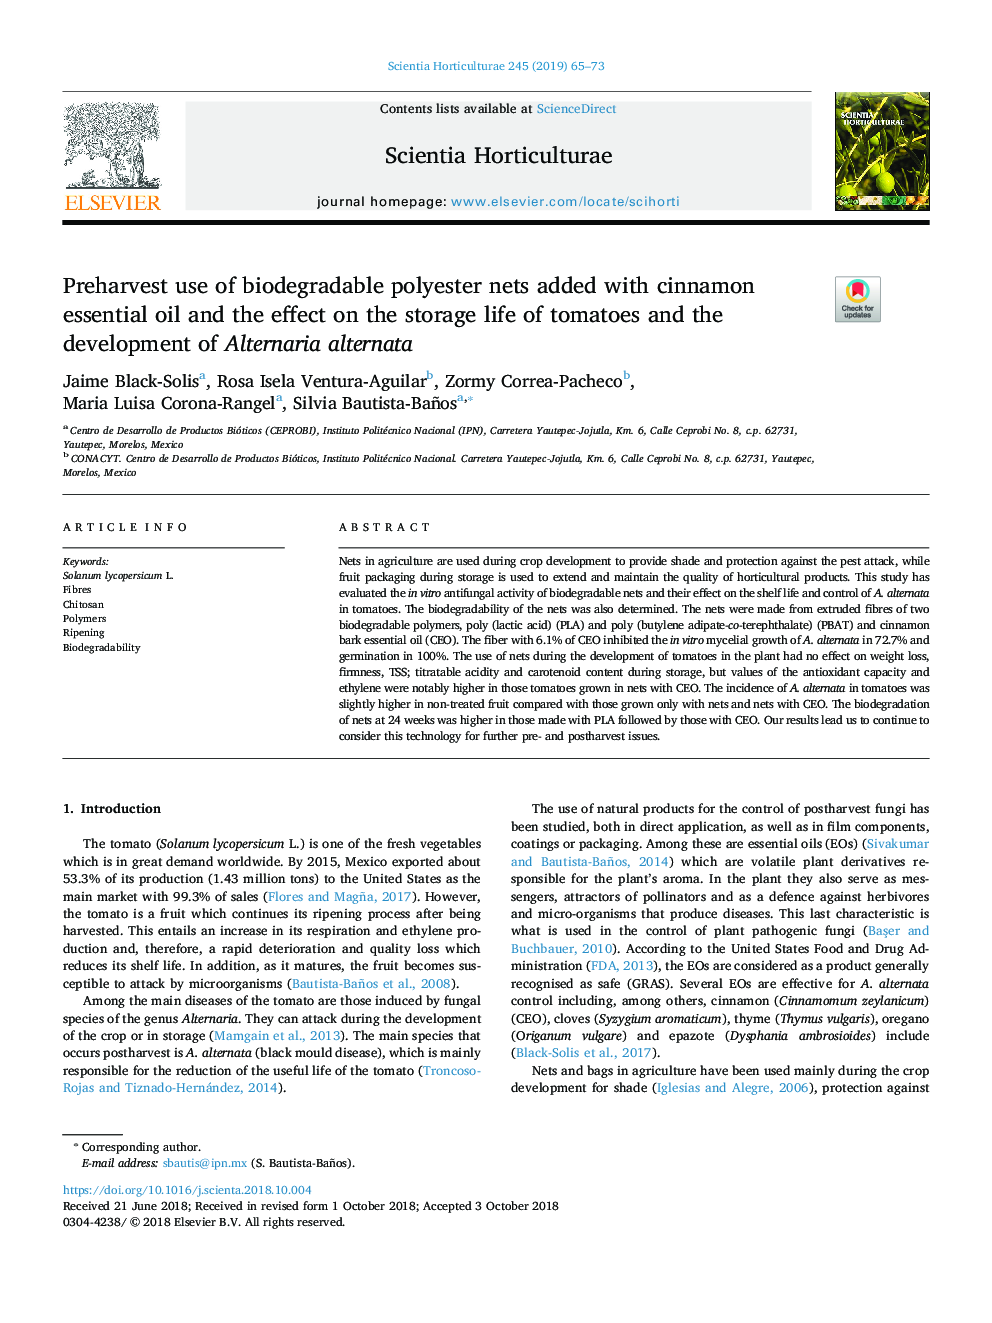 Preharvest use of biodegradable polyester nets added with cinnamon essential oil and the effect on the storage life of tomatoes and the development of Alternaria alternata